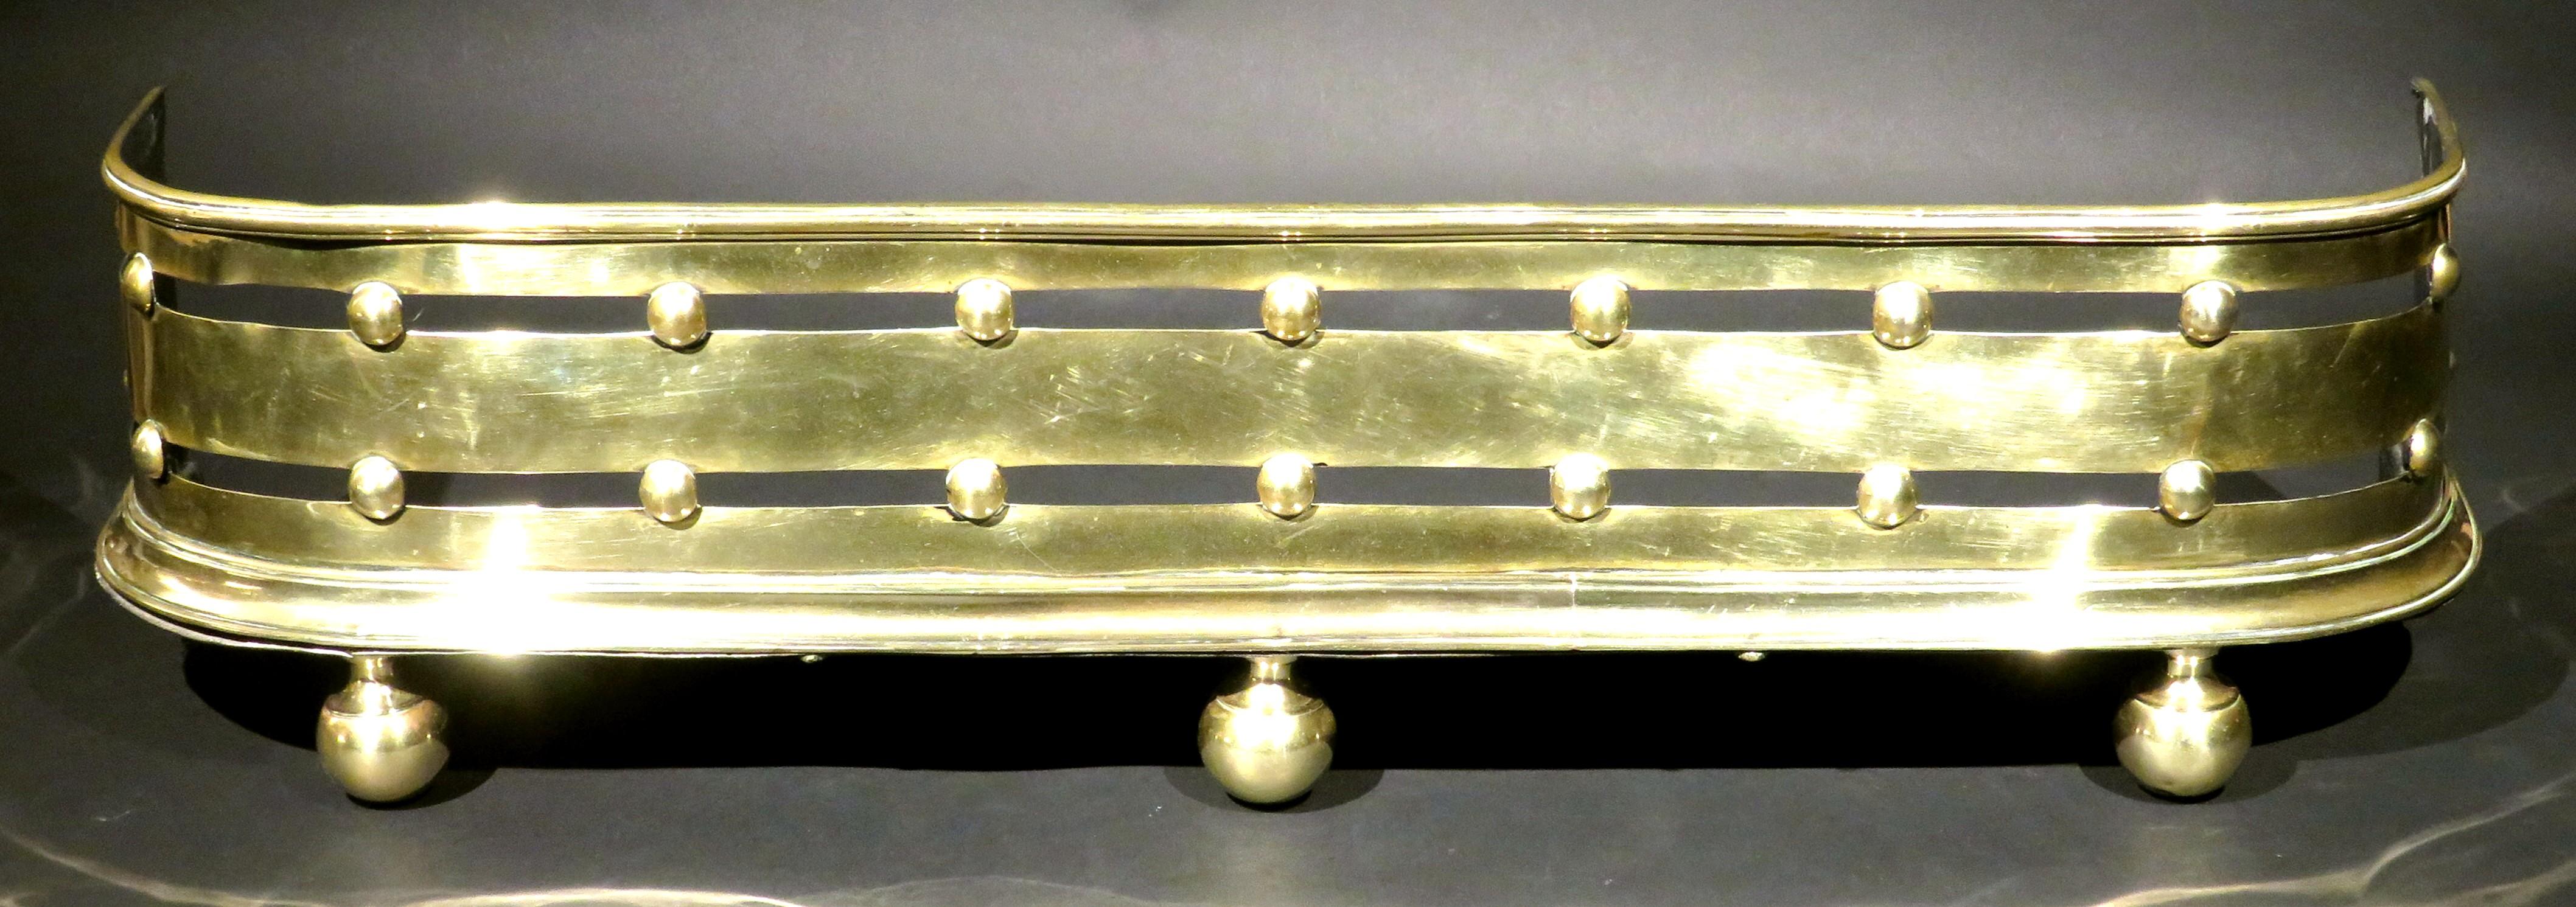 A very handsome & diminutive brass fire fender, showing a horizontal pierced panel interspersed by spherical elements, and raised overall on original ball feet.
  